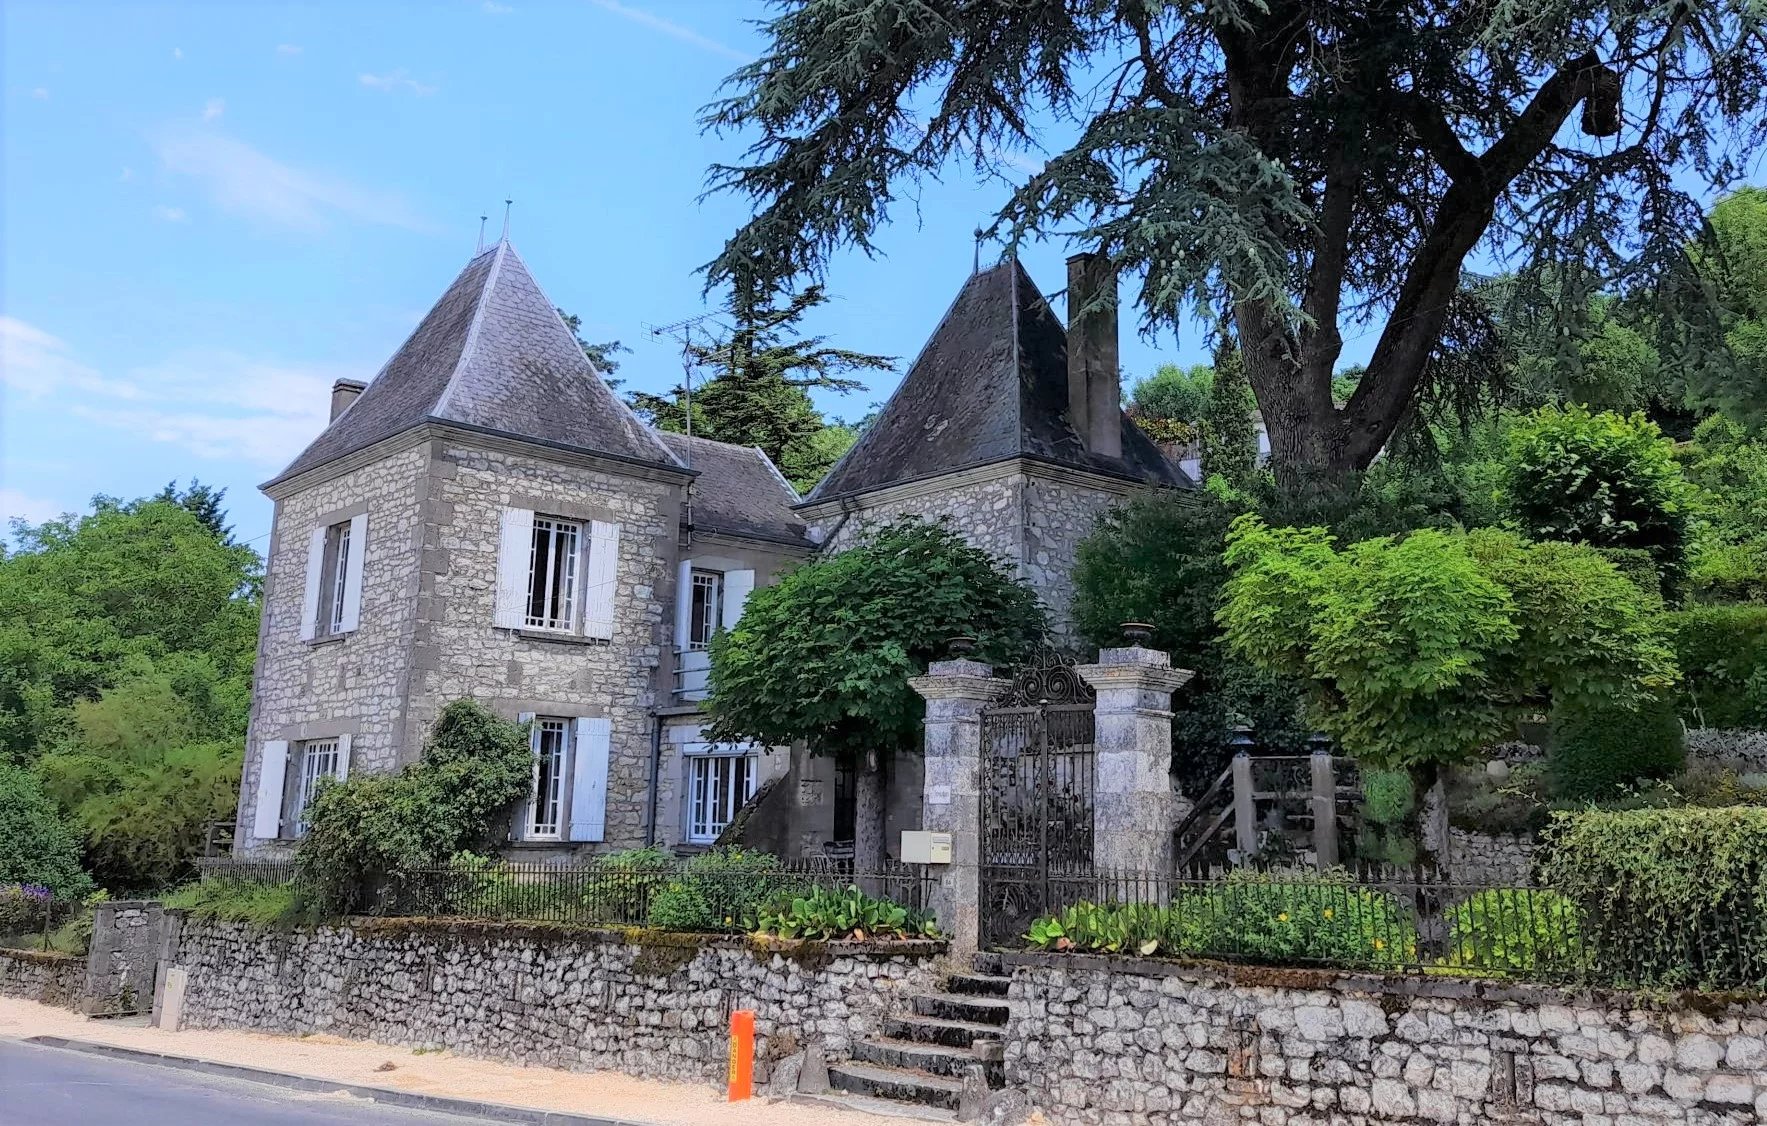 Bourgeois house on the edge of a medieval Bastide